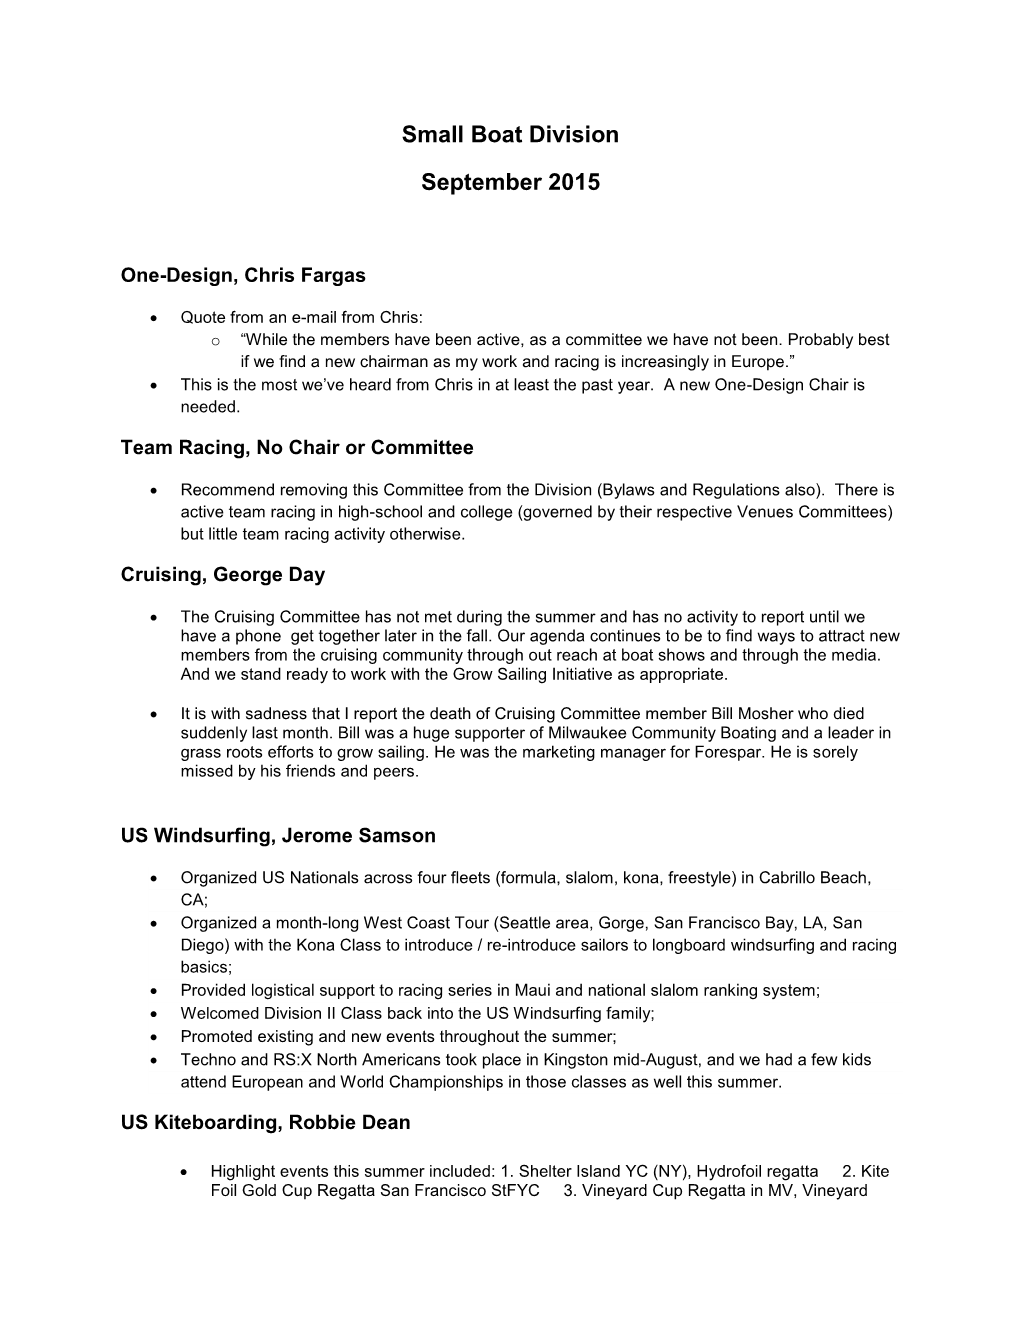 Small Boat Division September 2015